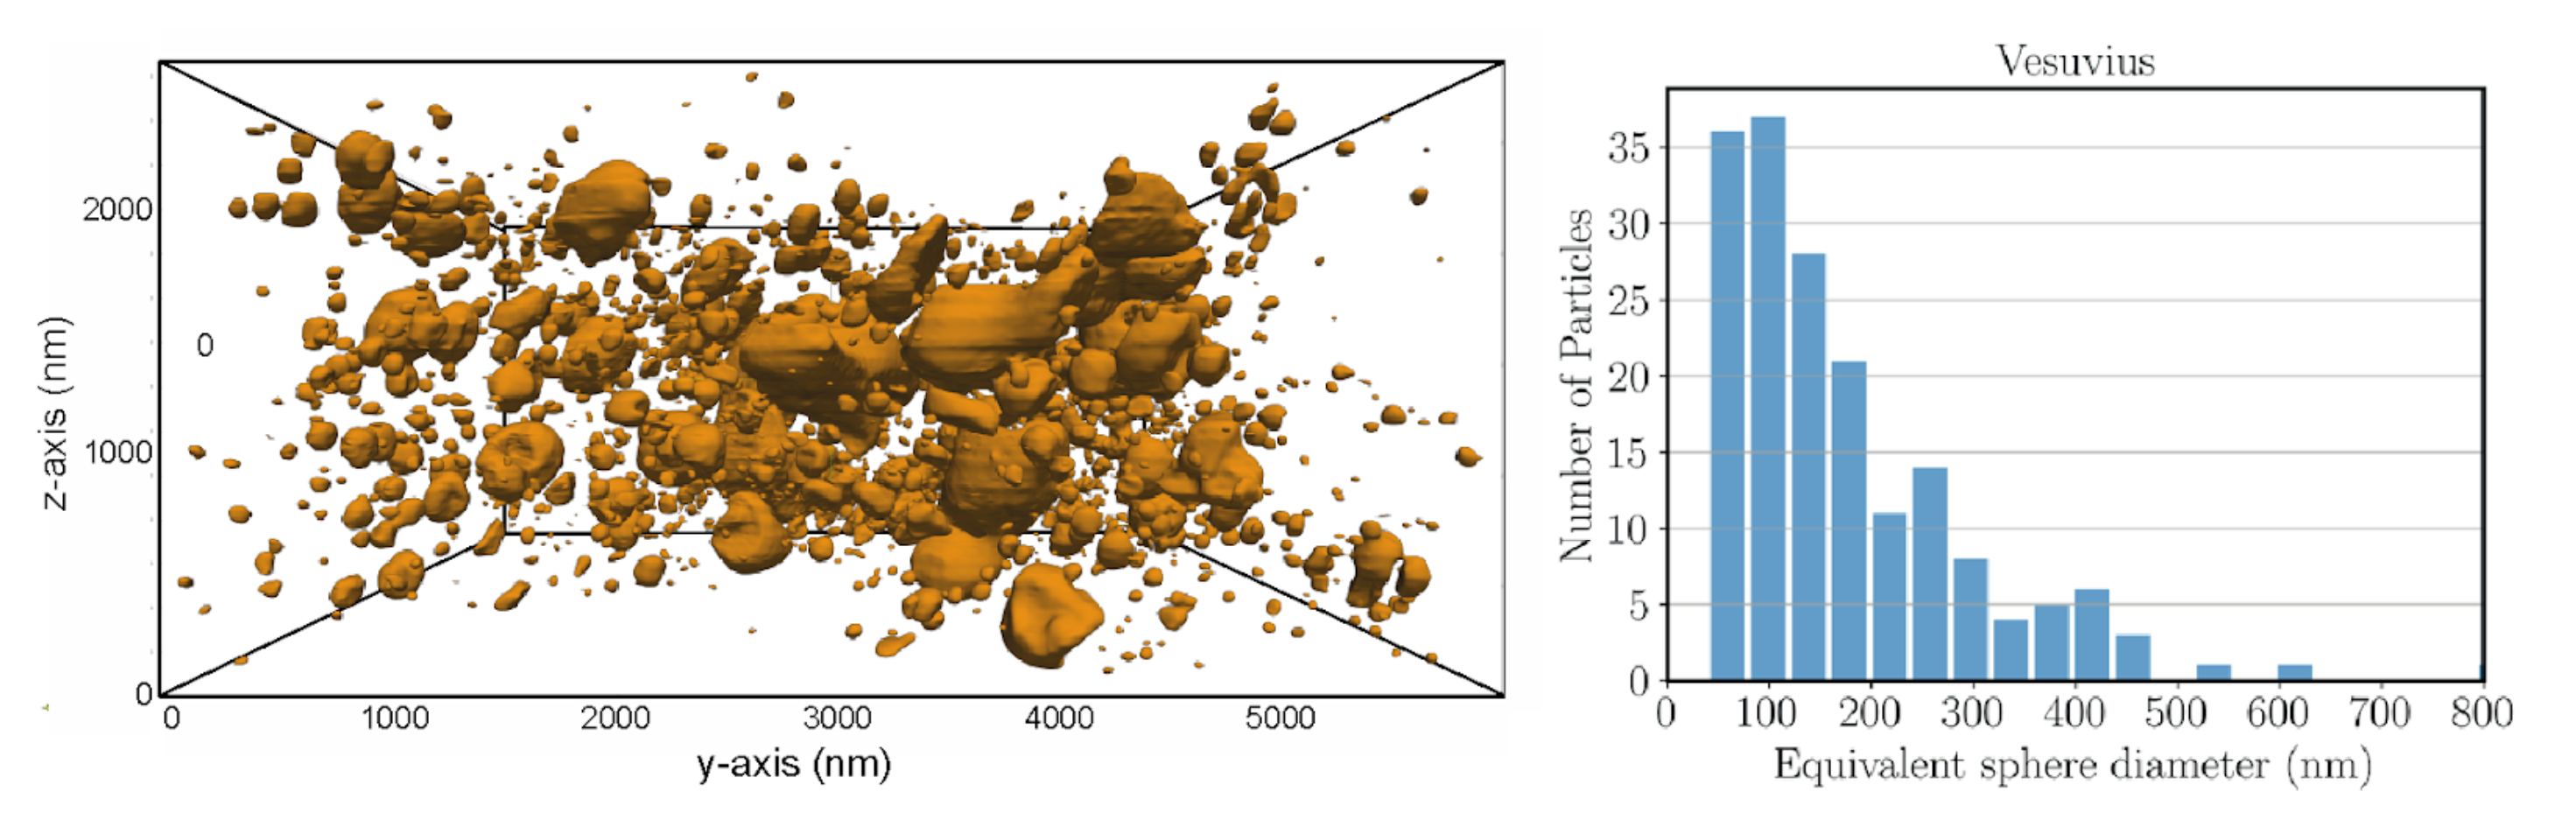 Focused ion beam slice-and-view reconstruction of magnetite particles within basalt from the 1944 Vesuvius eruption, with a grain size distribution on the right. The median grain size is 136nm from 175 particles measured, with a resolution of 3 nm. The grain distribution is highly varied and irregular, and requires an efficient and user-friendly tool to mesh the grains appropriately.